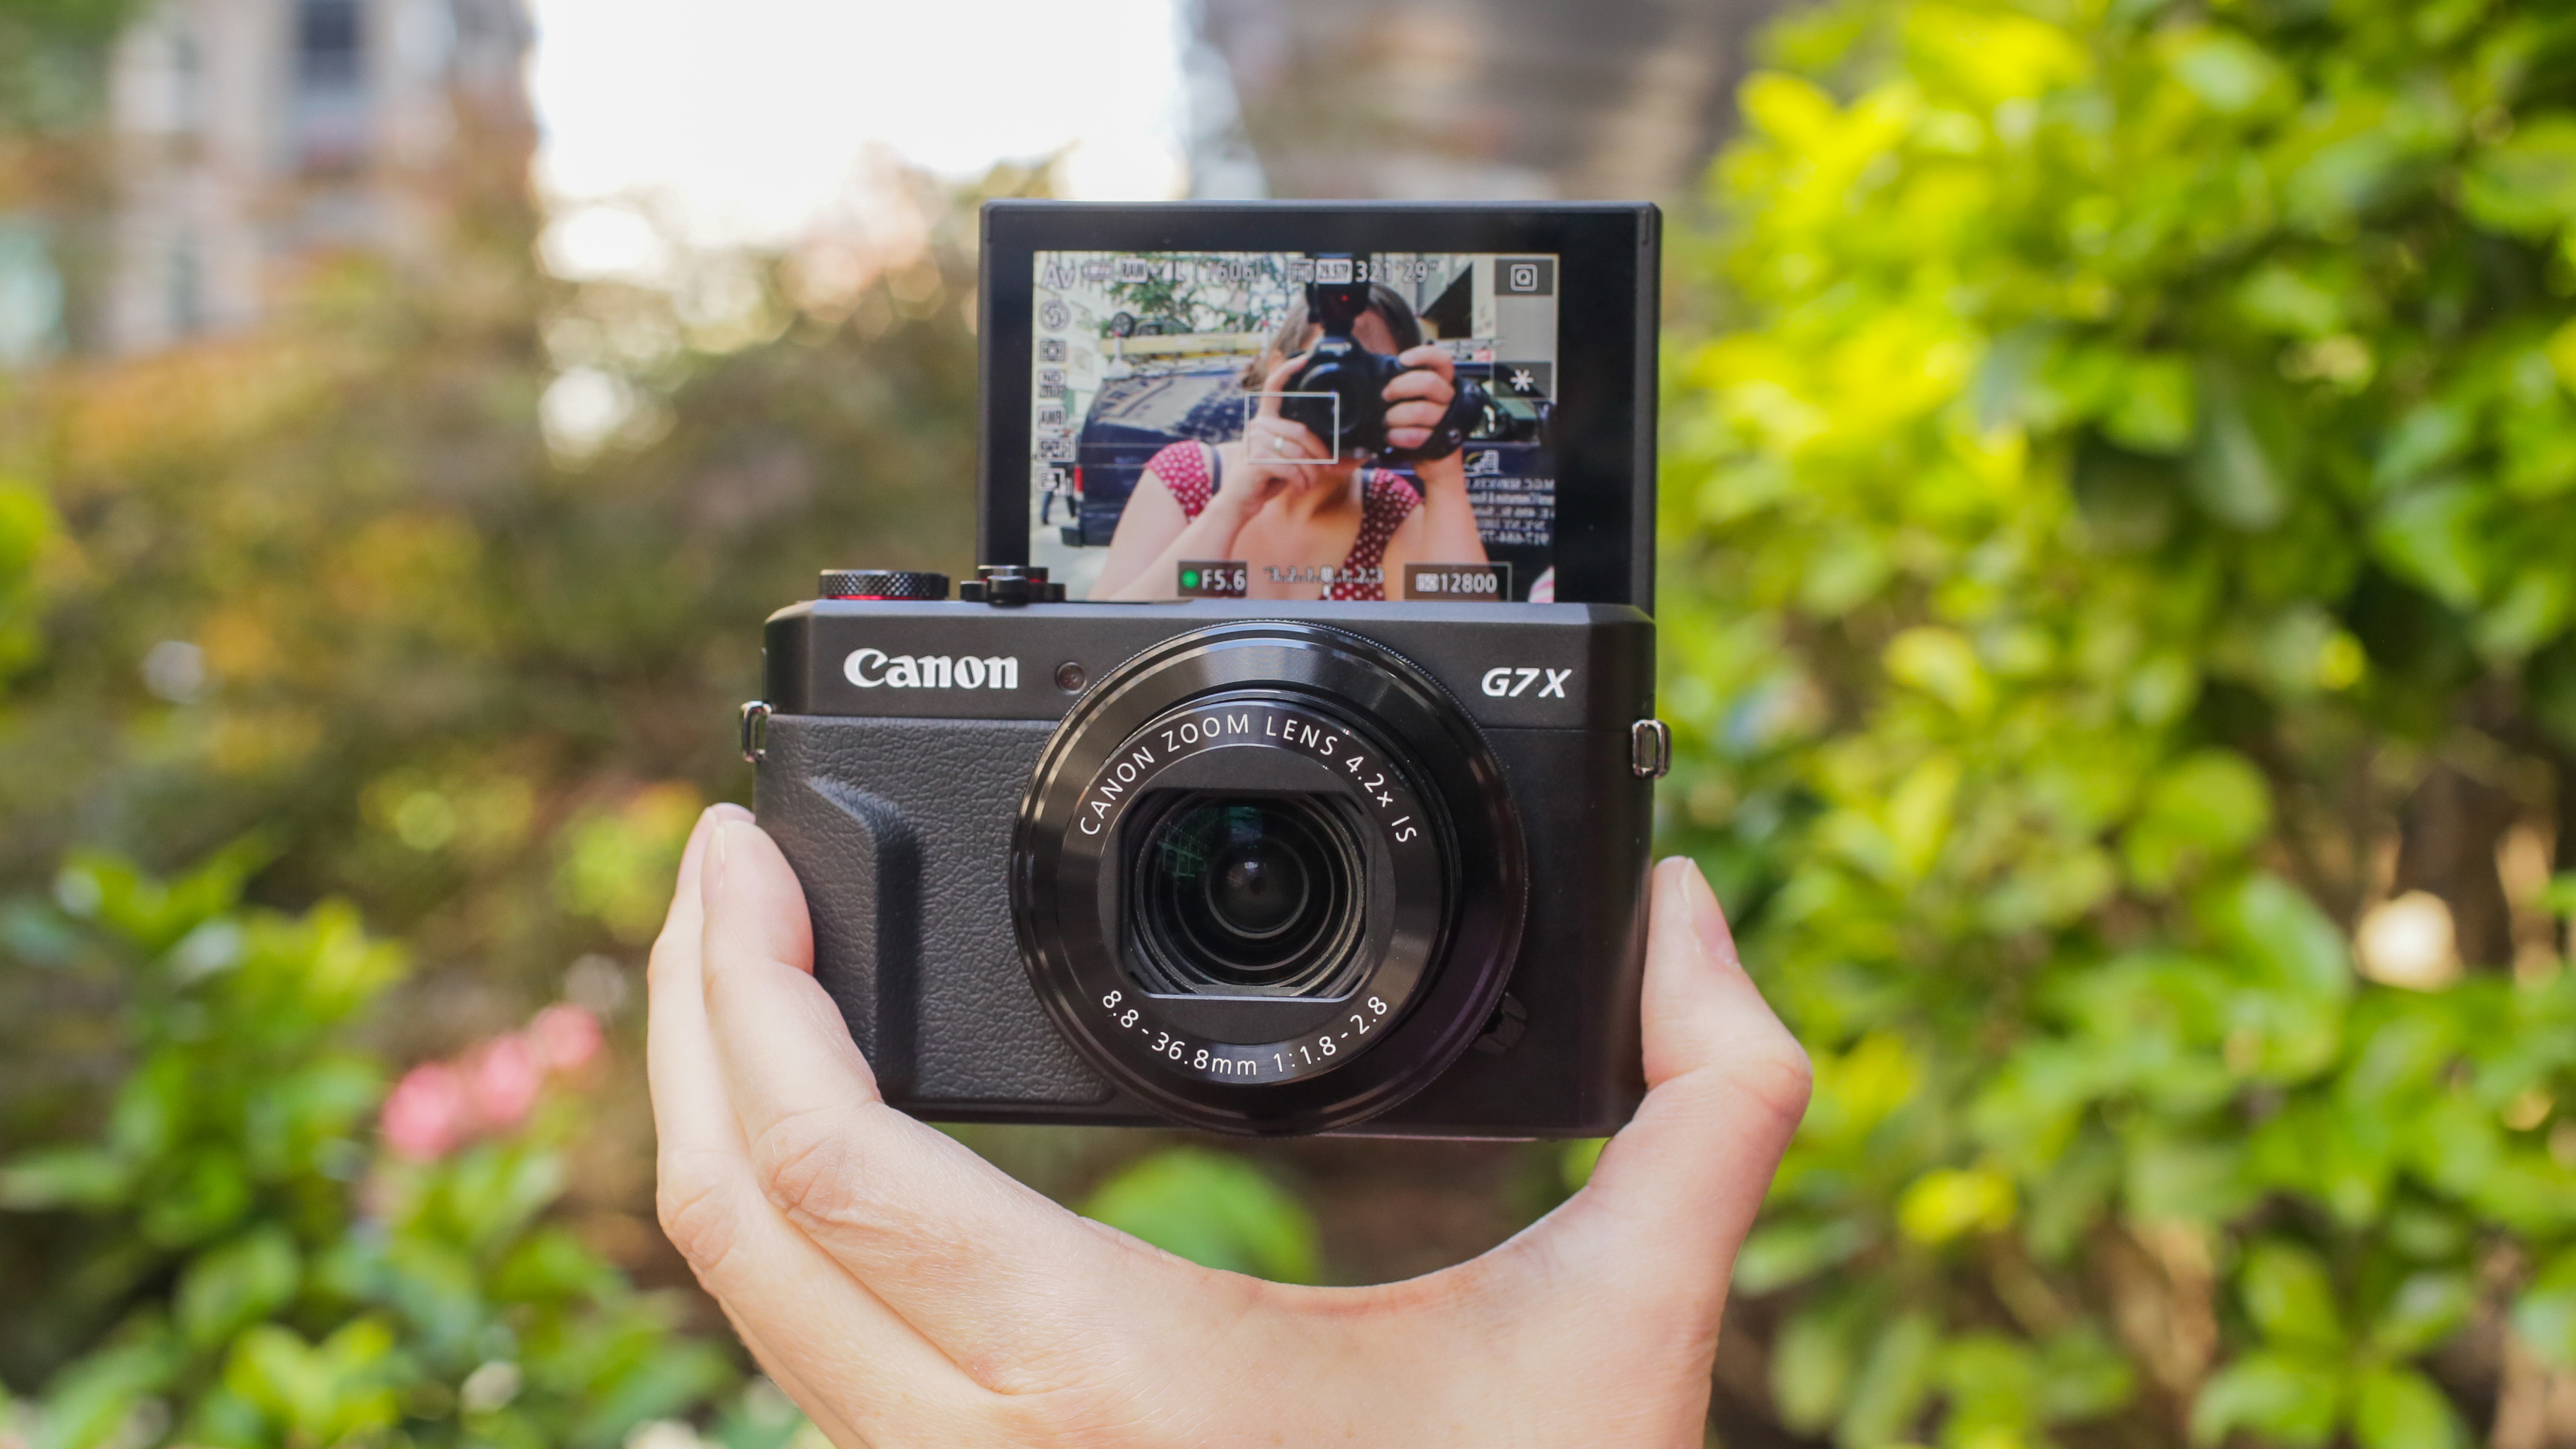 Canon Powershot G7 X Mark Ii Reviews on Sale, 59% OFF | barsauvage.com